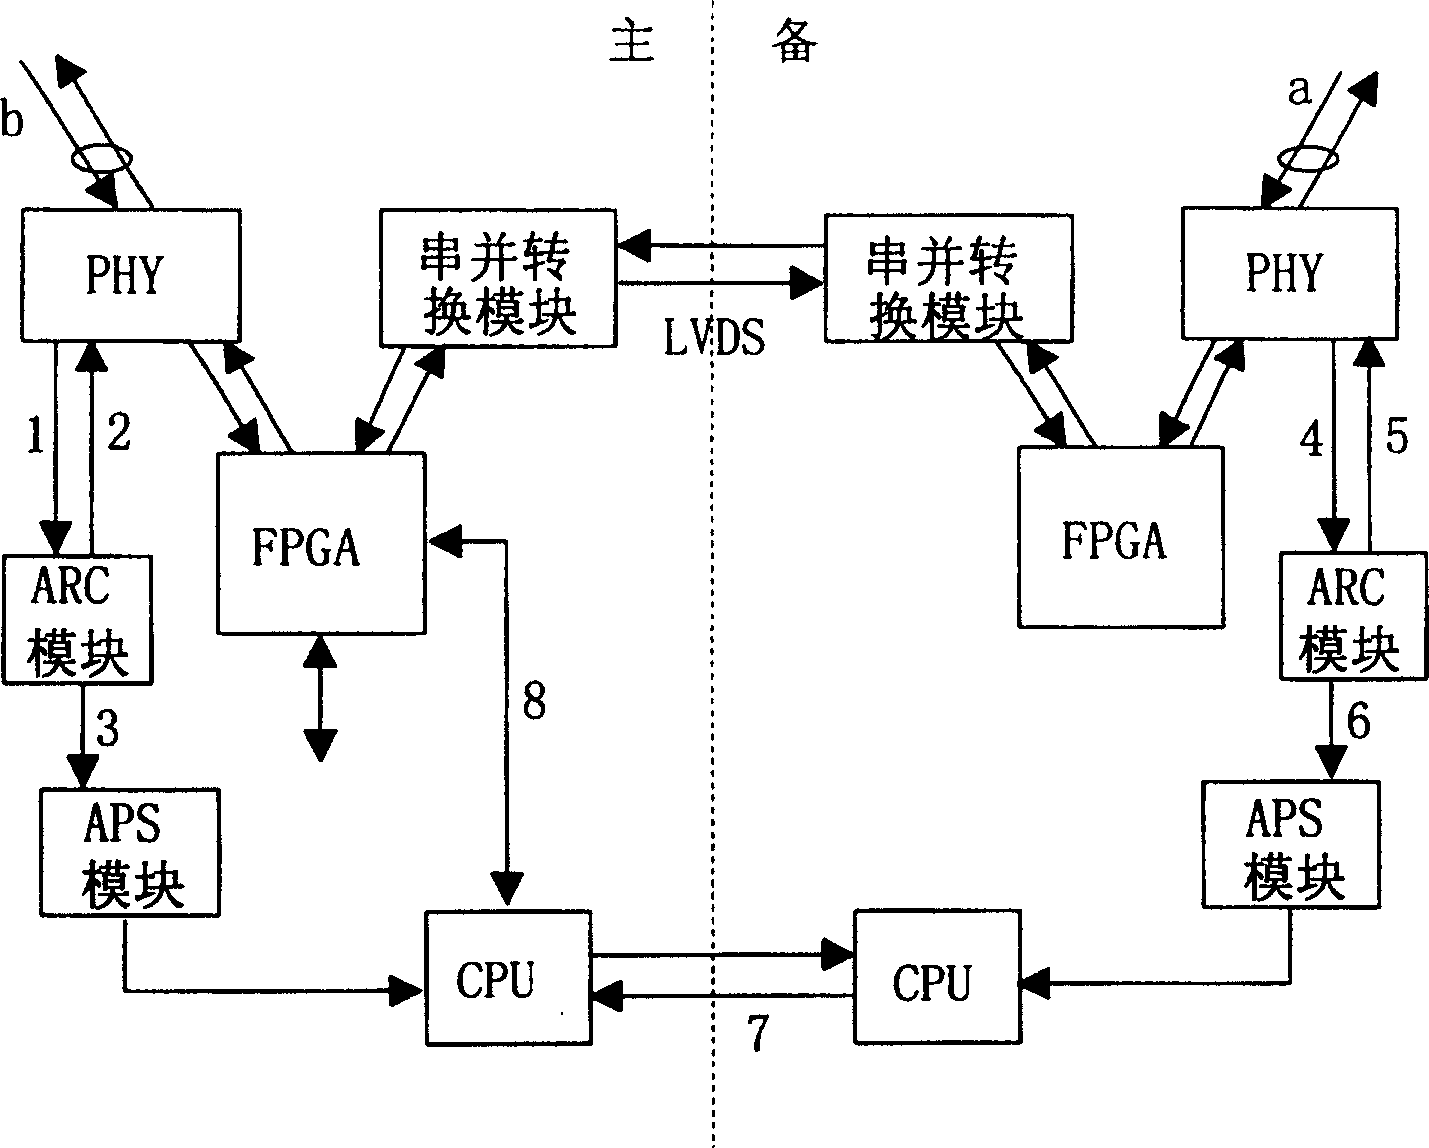 Method for implementing quick optical fibre protective inversion in ring network and its equipment